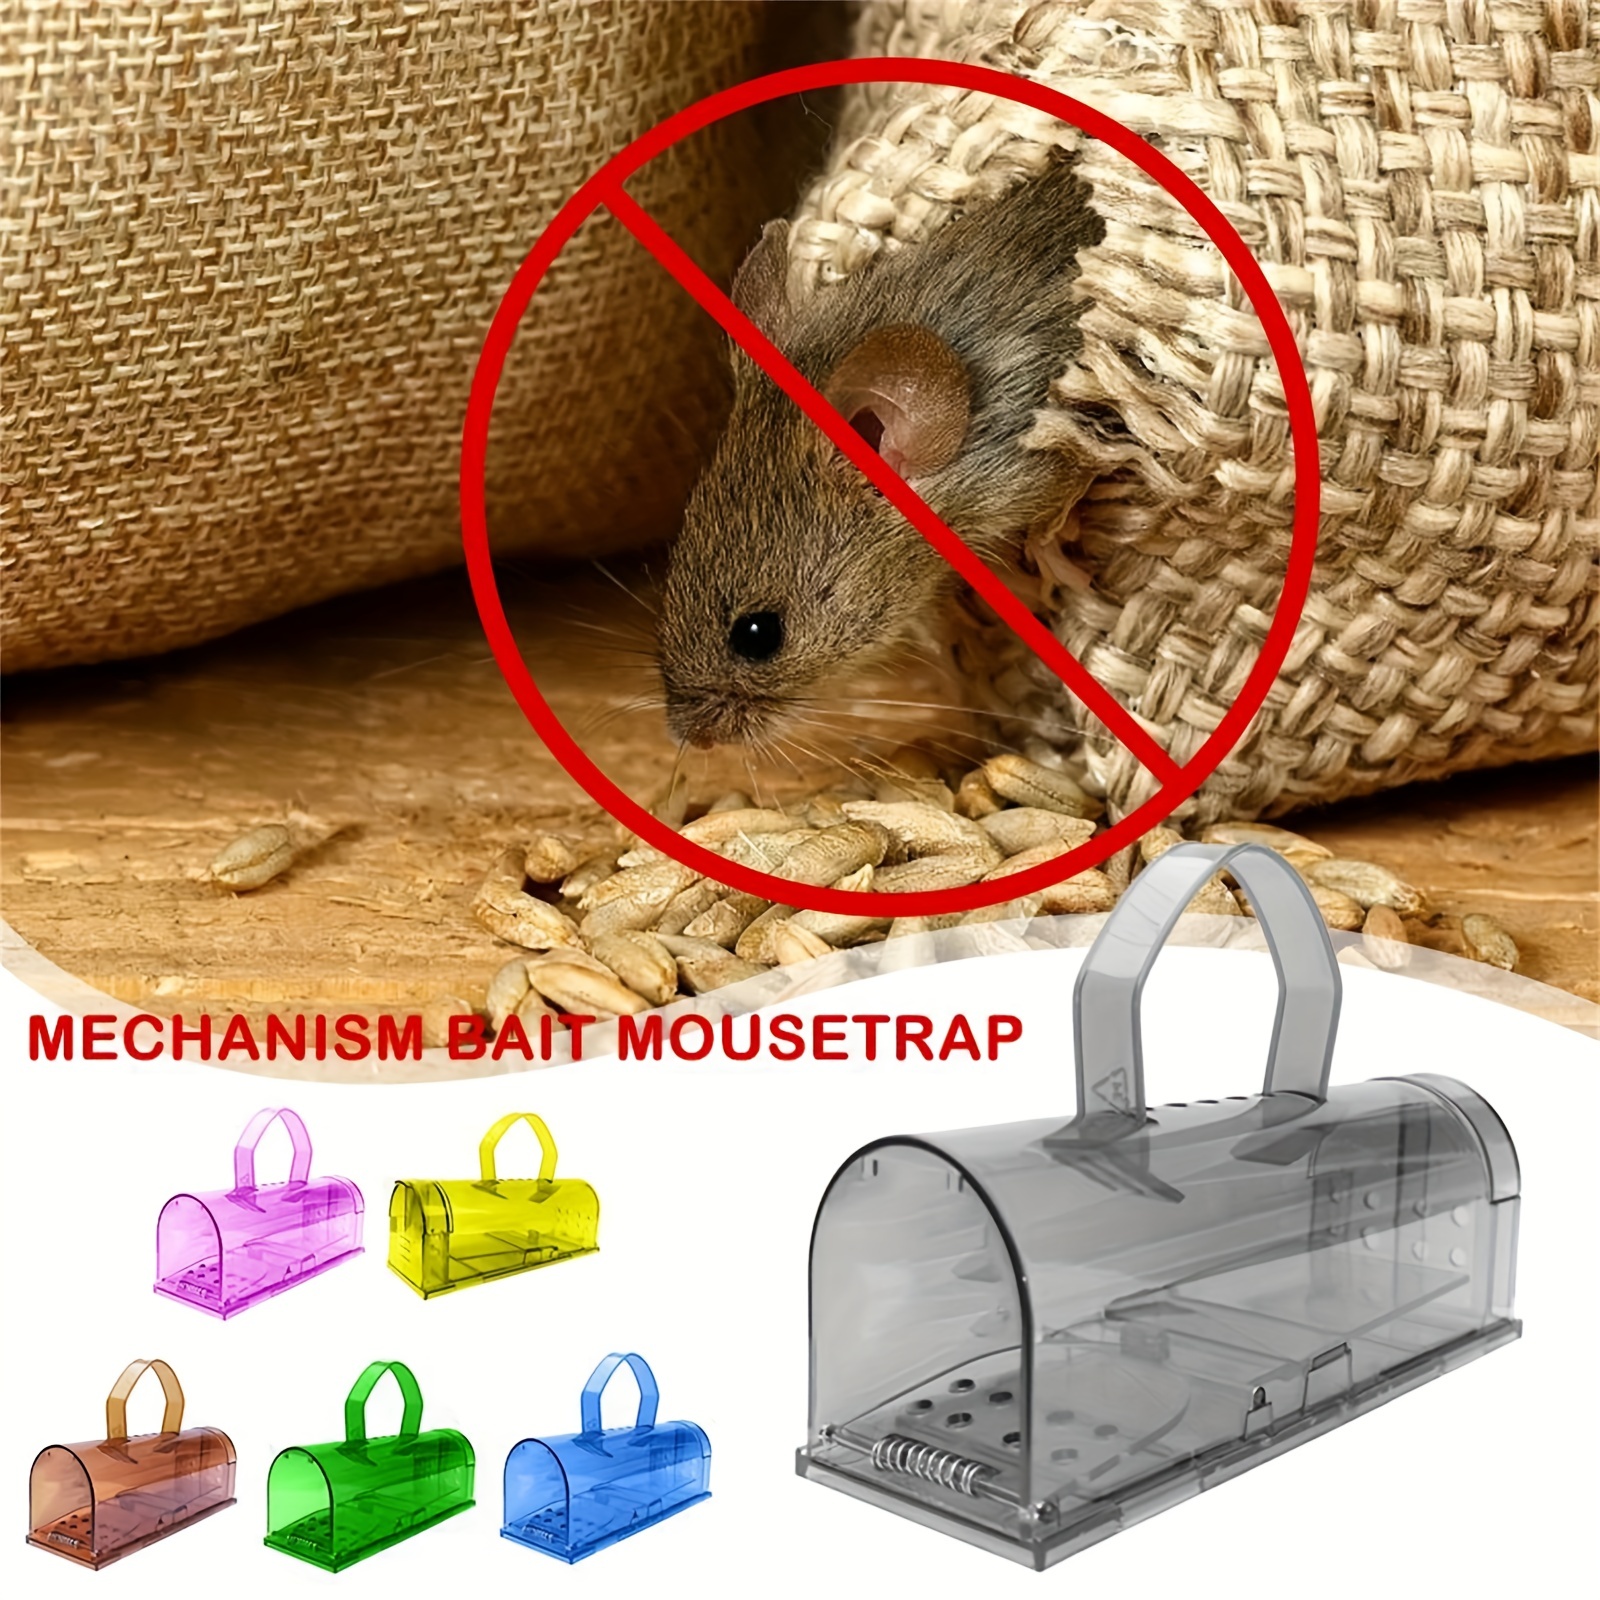 CaptSure 2019 Humane Smart Indoor/Outdoor Mouse Trap for Small Rodents –  Pest Control Everything